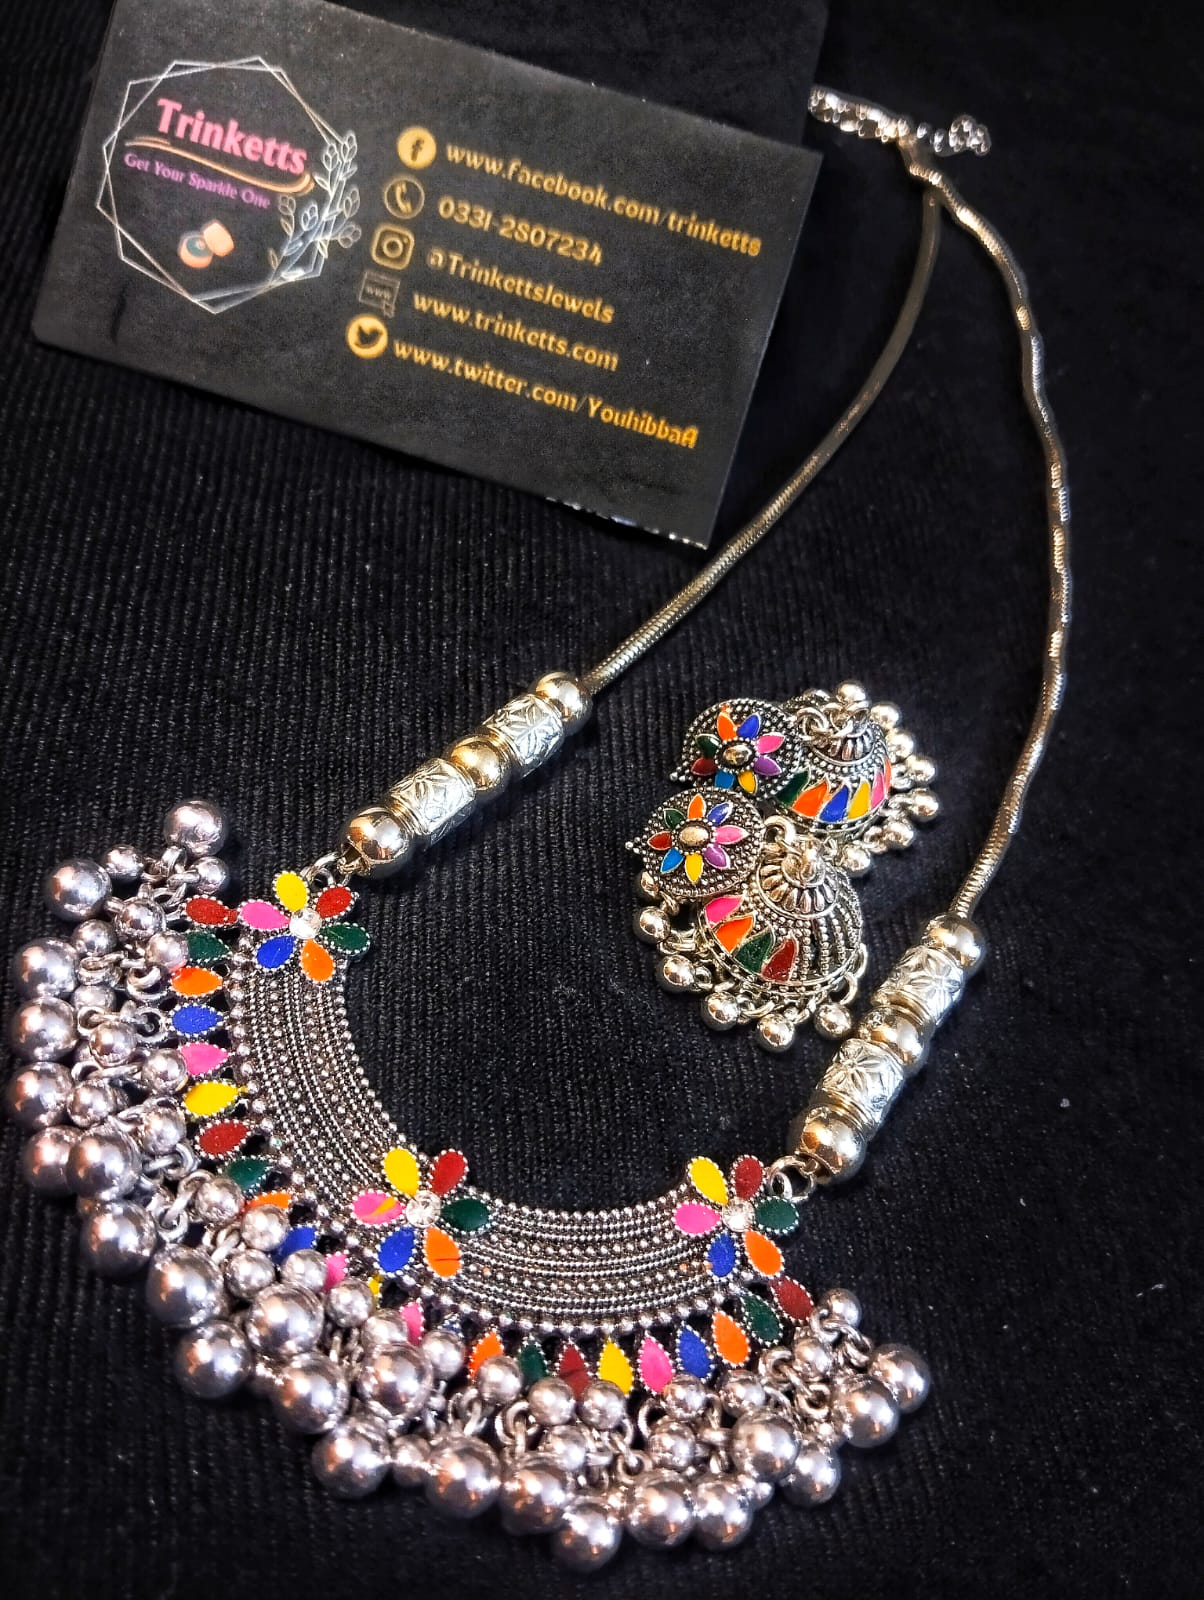 Silver Oxidized Chain with Ghungroo Pendant and Multicolored Meena Kaari Jhumkis - Affordable Pakistani Jewelry